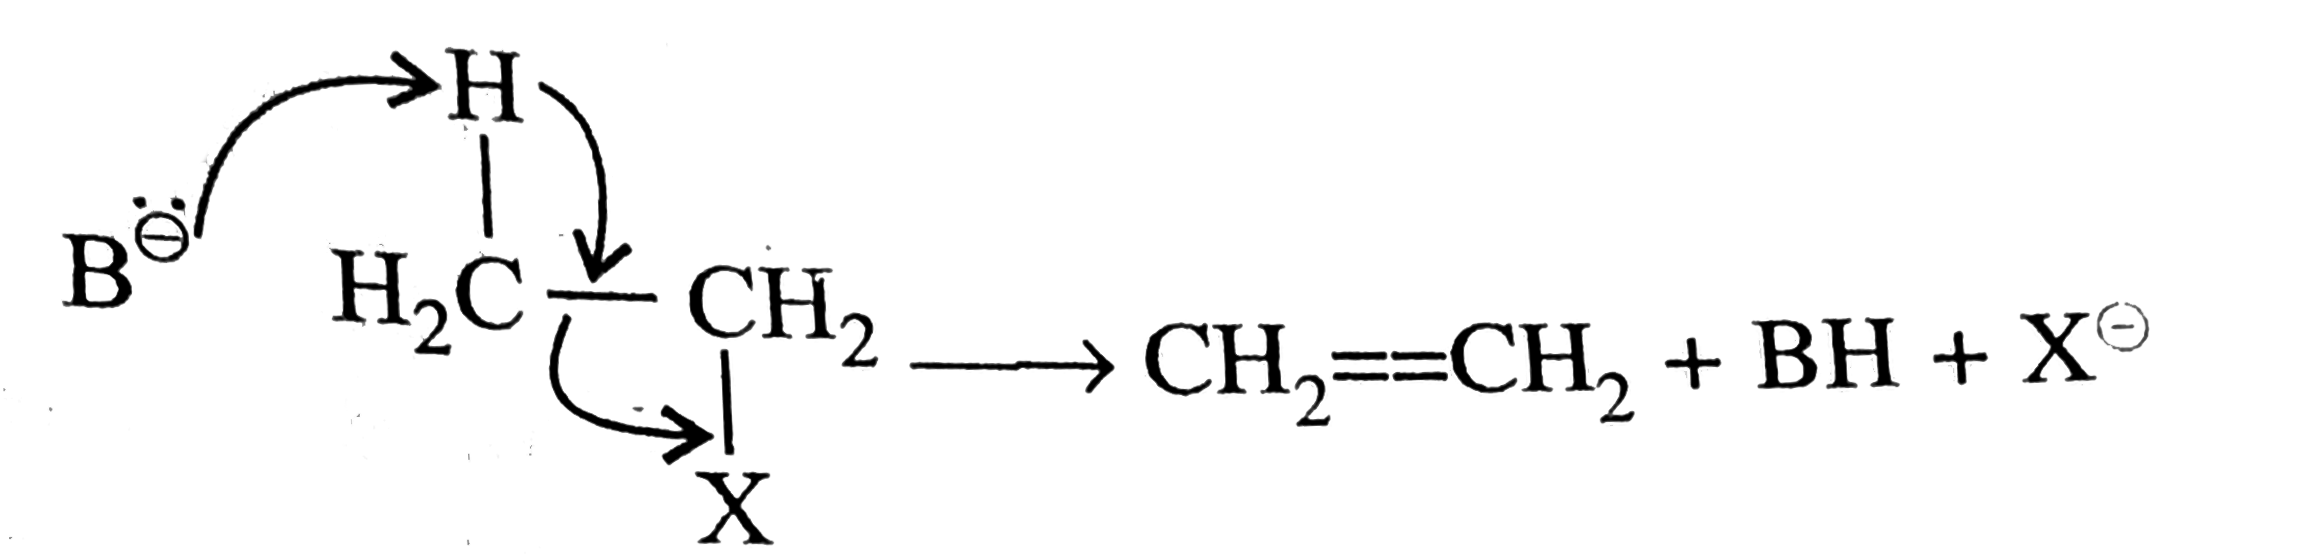 beta- Elimination or anti-eliminination reaction is carried out with base (B^(o-)) as shown below:      The following bases are used.   I. overset(o-)(O)H   II. RO^(o-)   III. RCOO^(o-) , IV. overset(o-)(C)N   V. NO(3)^(o-)   The decreasing order of reactivity for the above elimination is: